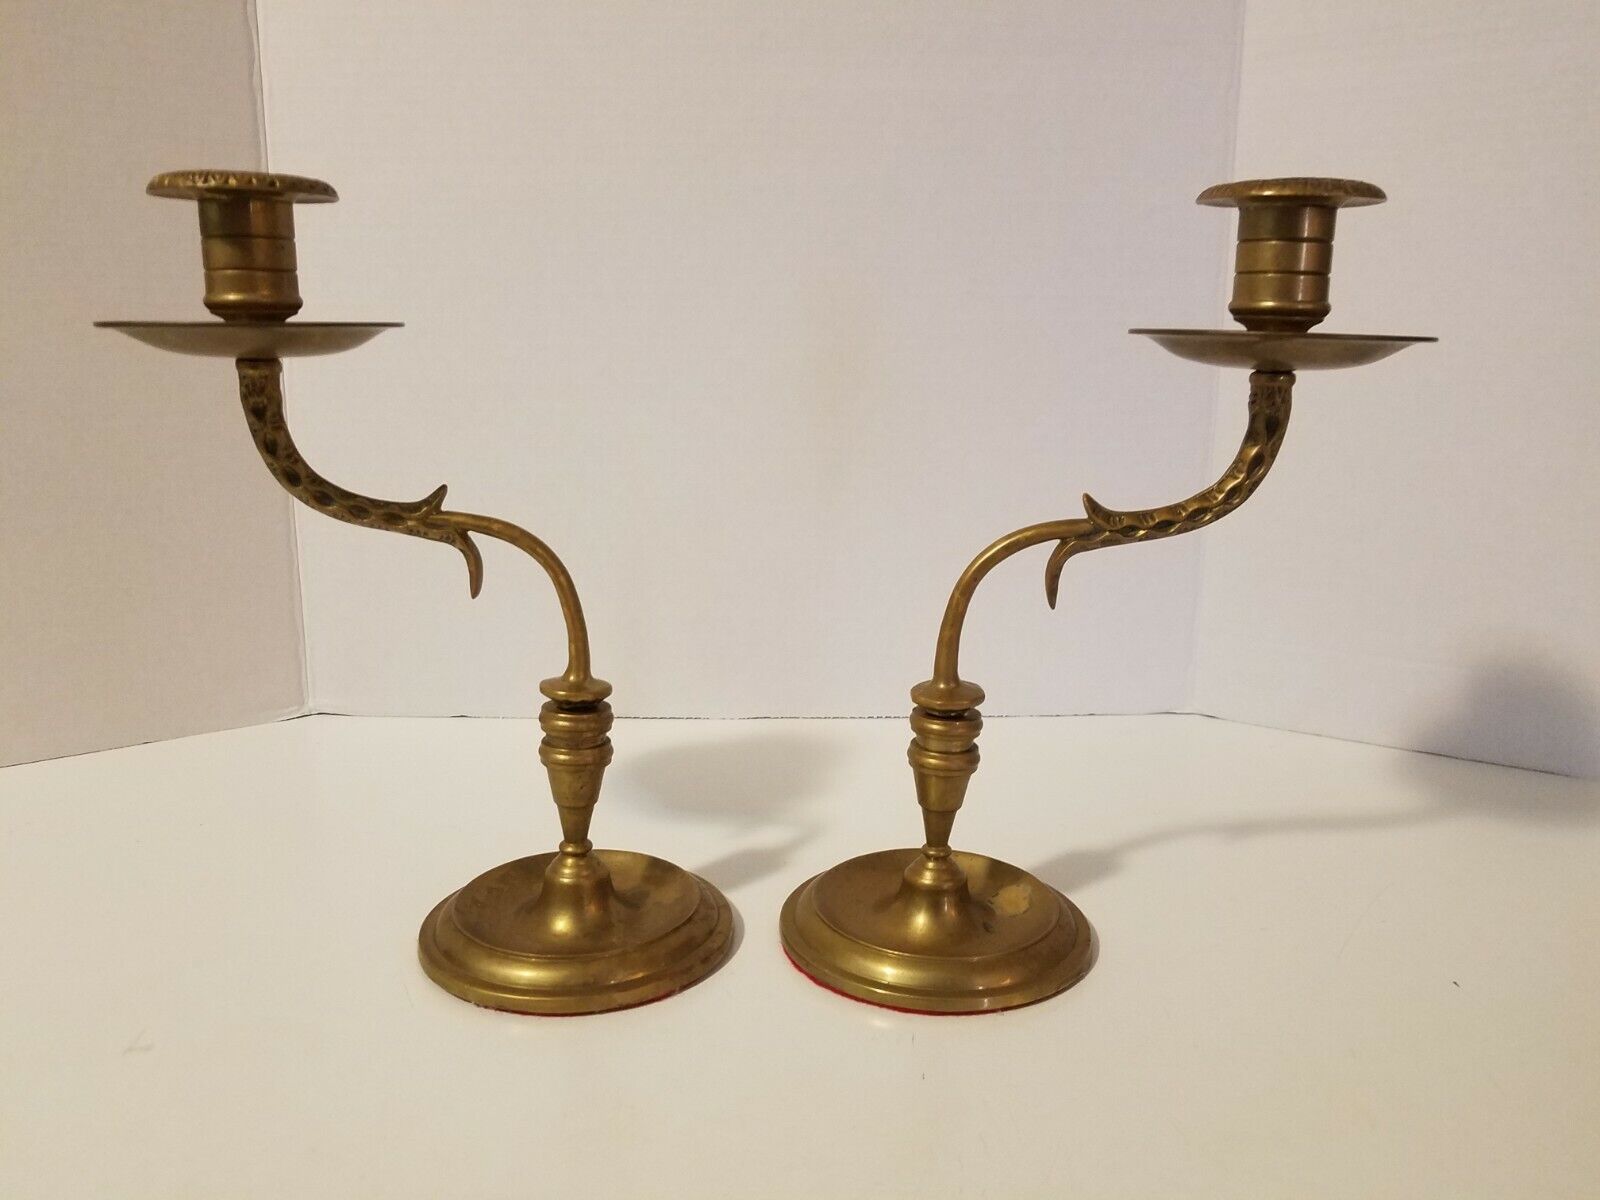 Pair Of Antique Solid Brass Weighted Piano Candlestick Holders Home Decor